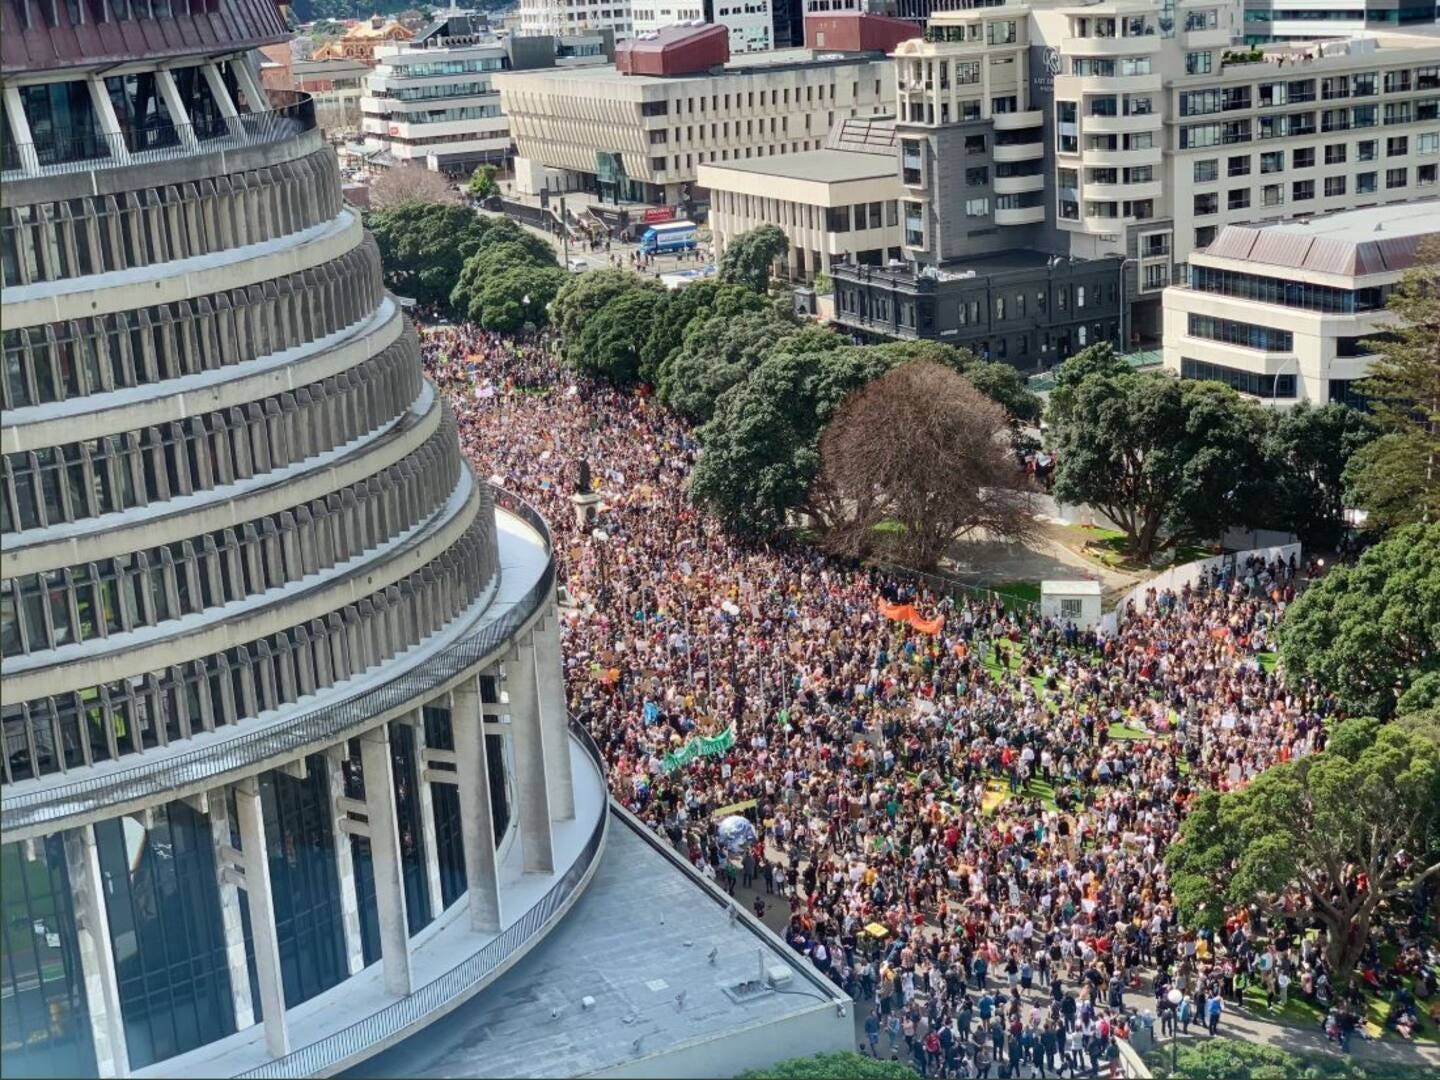 An aerial shot of the Parliament Lawn with the Beehive shown in the corner, packed with a crowd of people holding banners and signs.